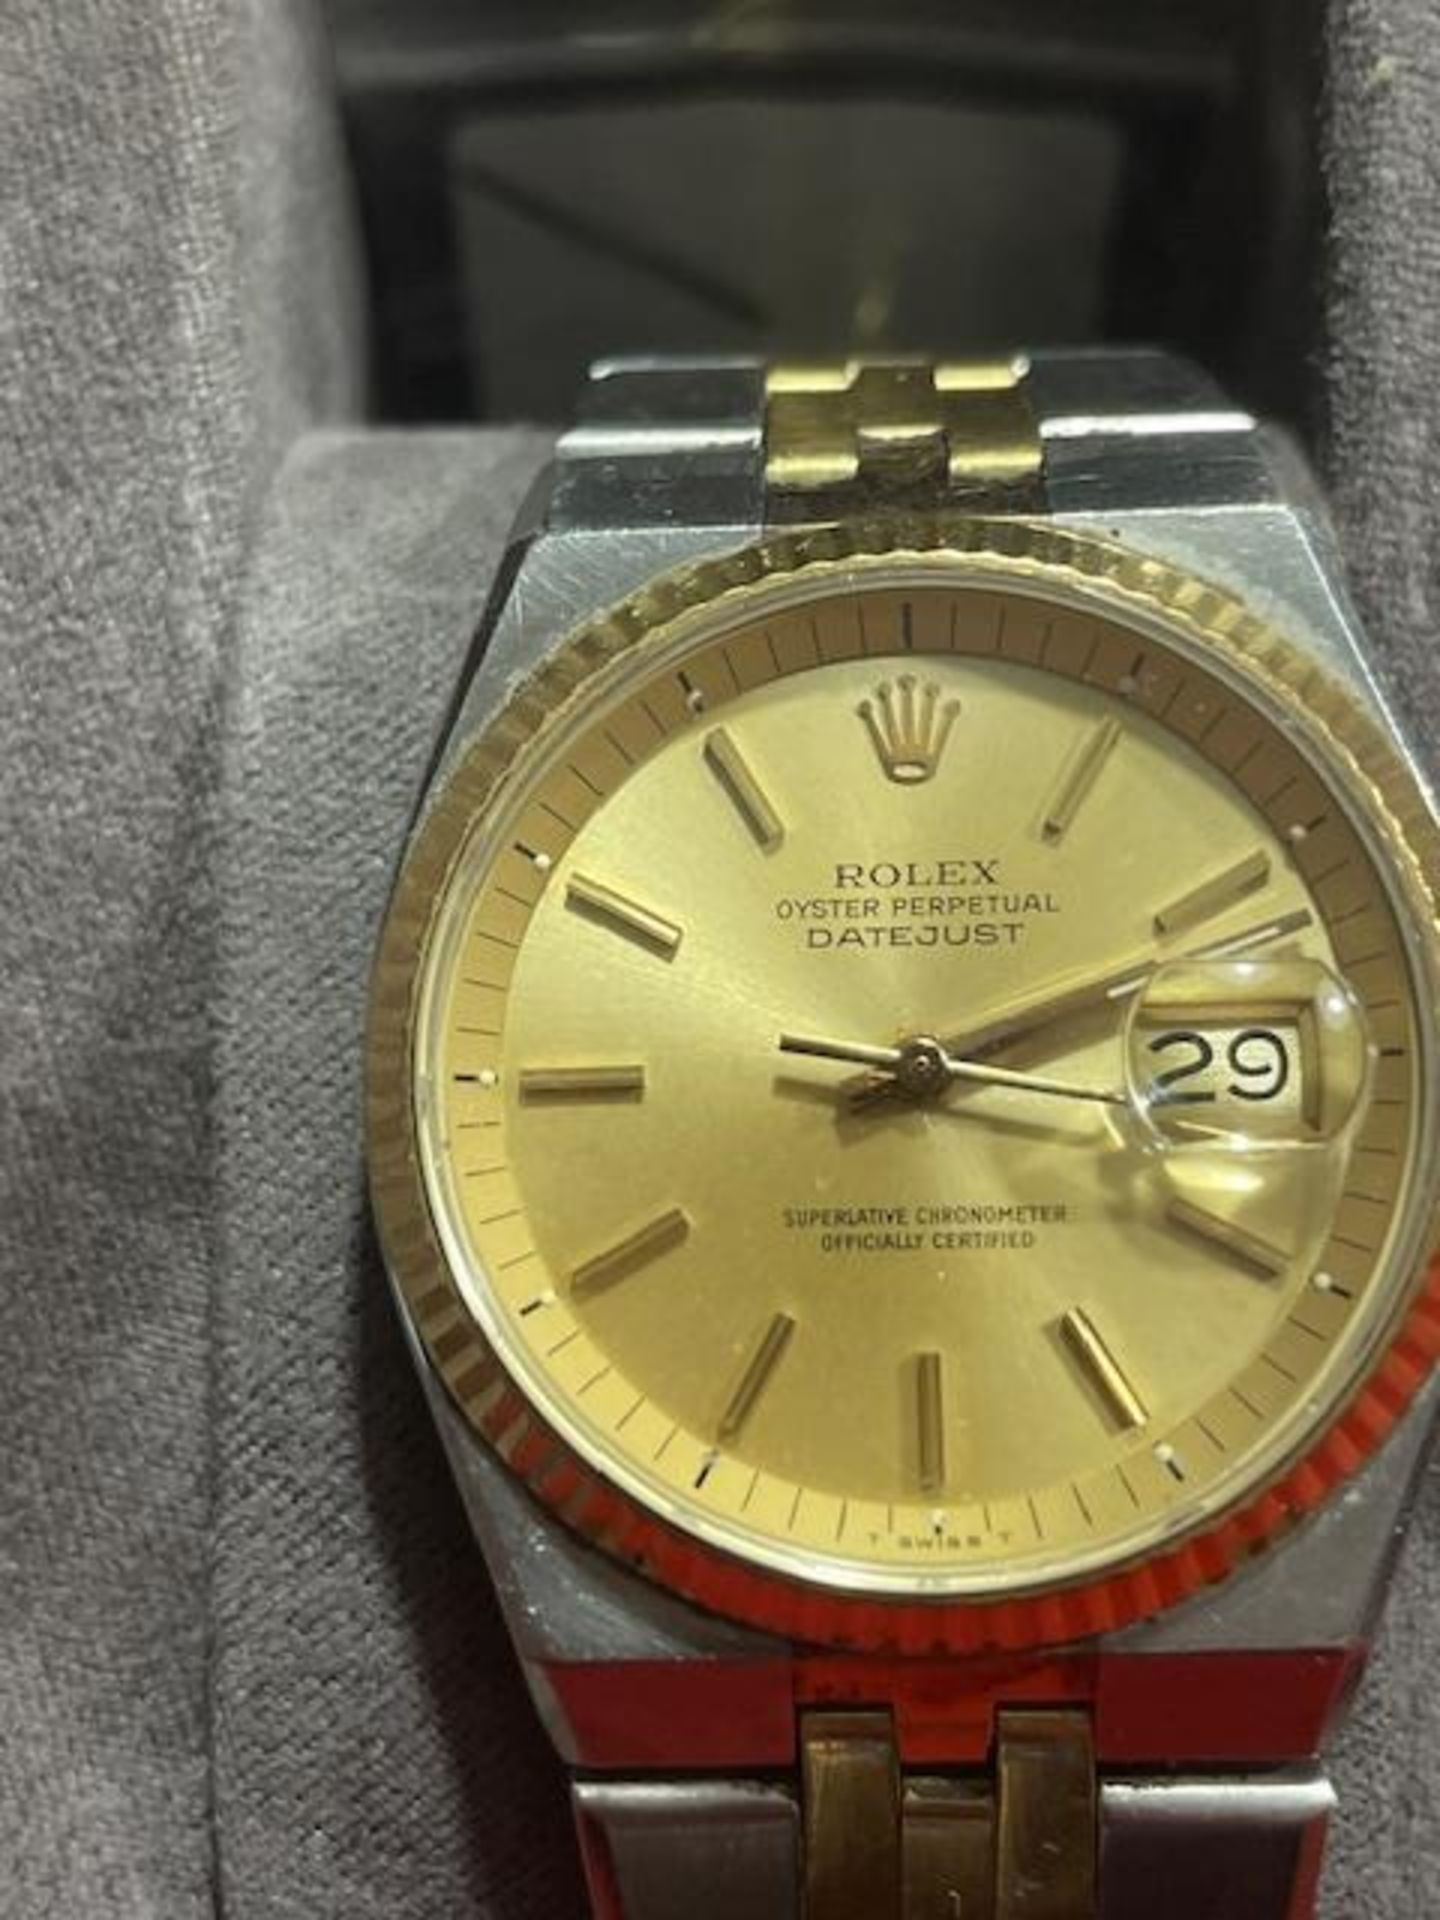 Rolex Oyster Purpetual DATEJUST Mens Watch - Image 7 of 15